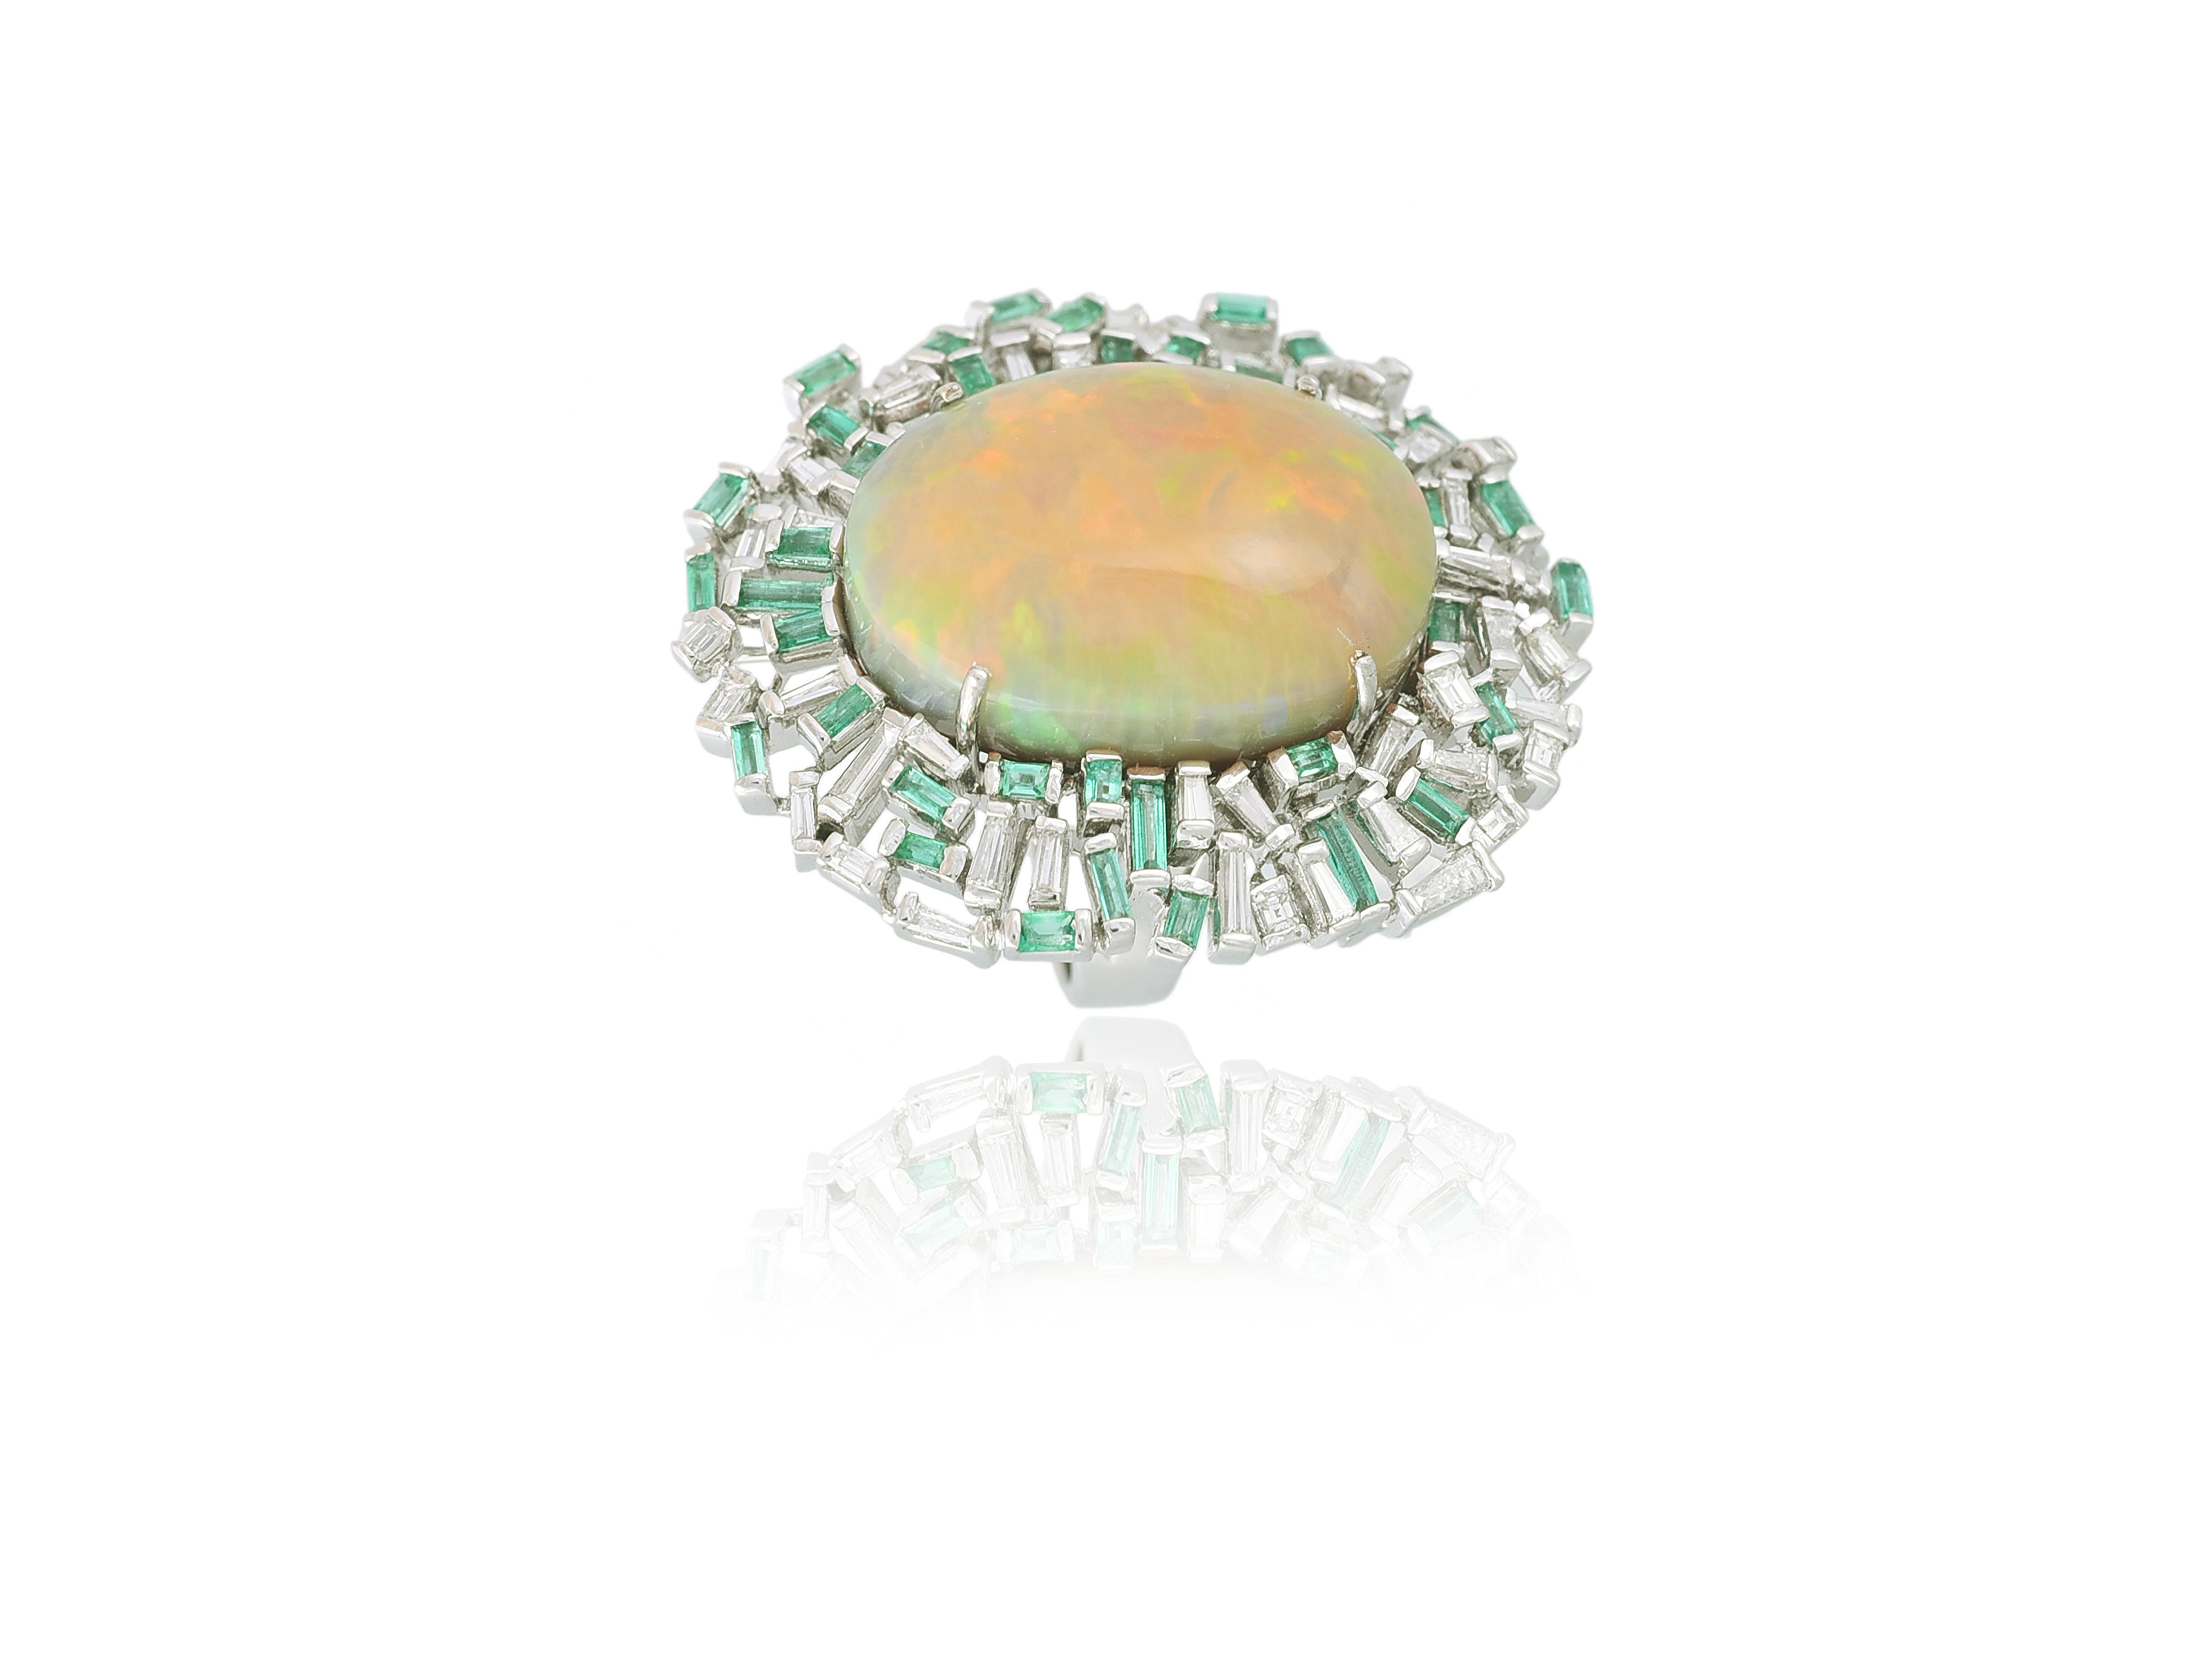 A one of a kind, oversized Ethiopian Opal, Baguette Emeralds & Baguette Diamonds cocktail ring set in 18K gold. The weight of the Ethiopian opal is 31.47 carats. The opal is natural from Ethiopia. The weight of the Emeralds is 1.46 carats. The